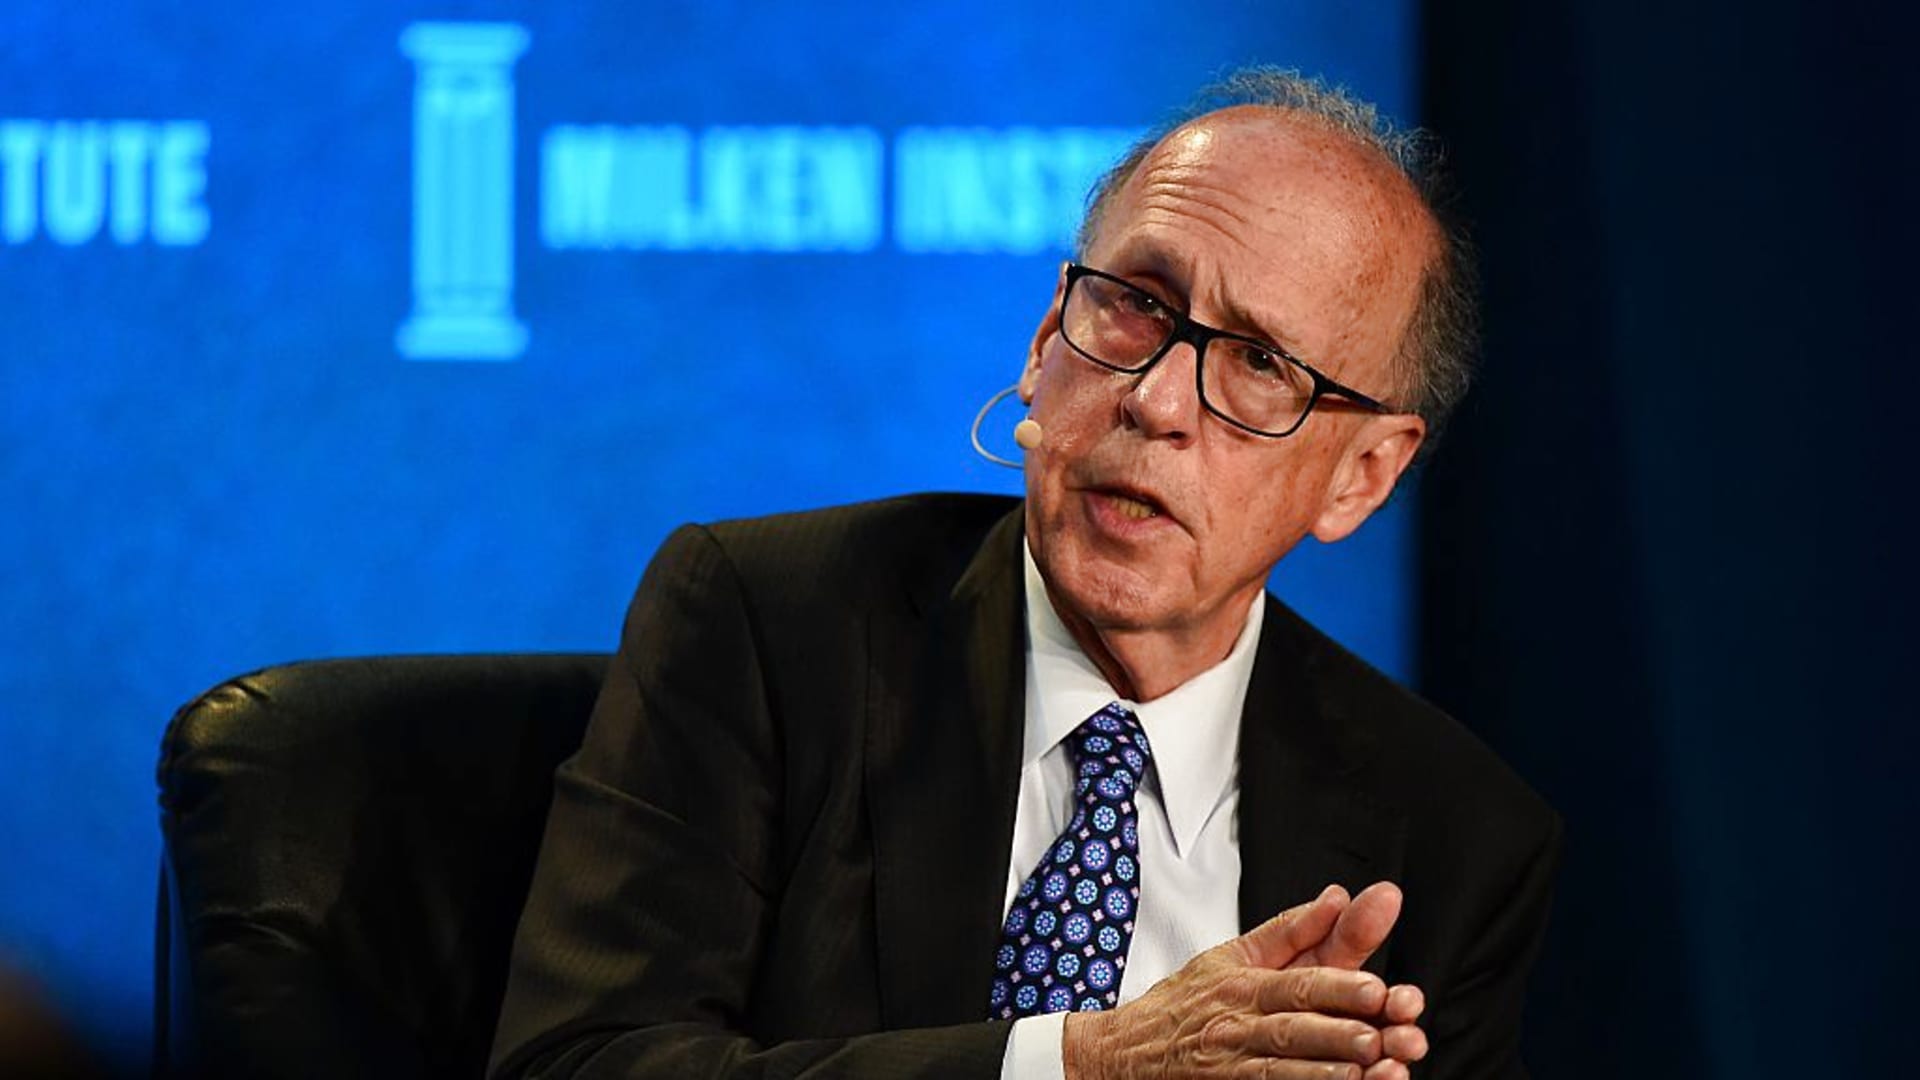 The US needs a miracle to avoid recession, warns economist Stephen Roach